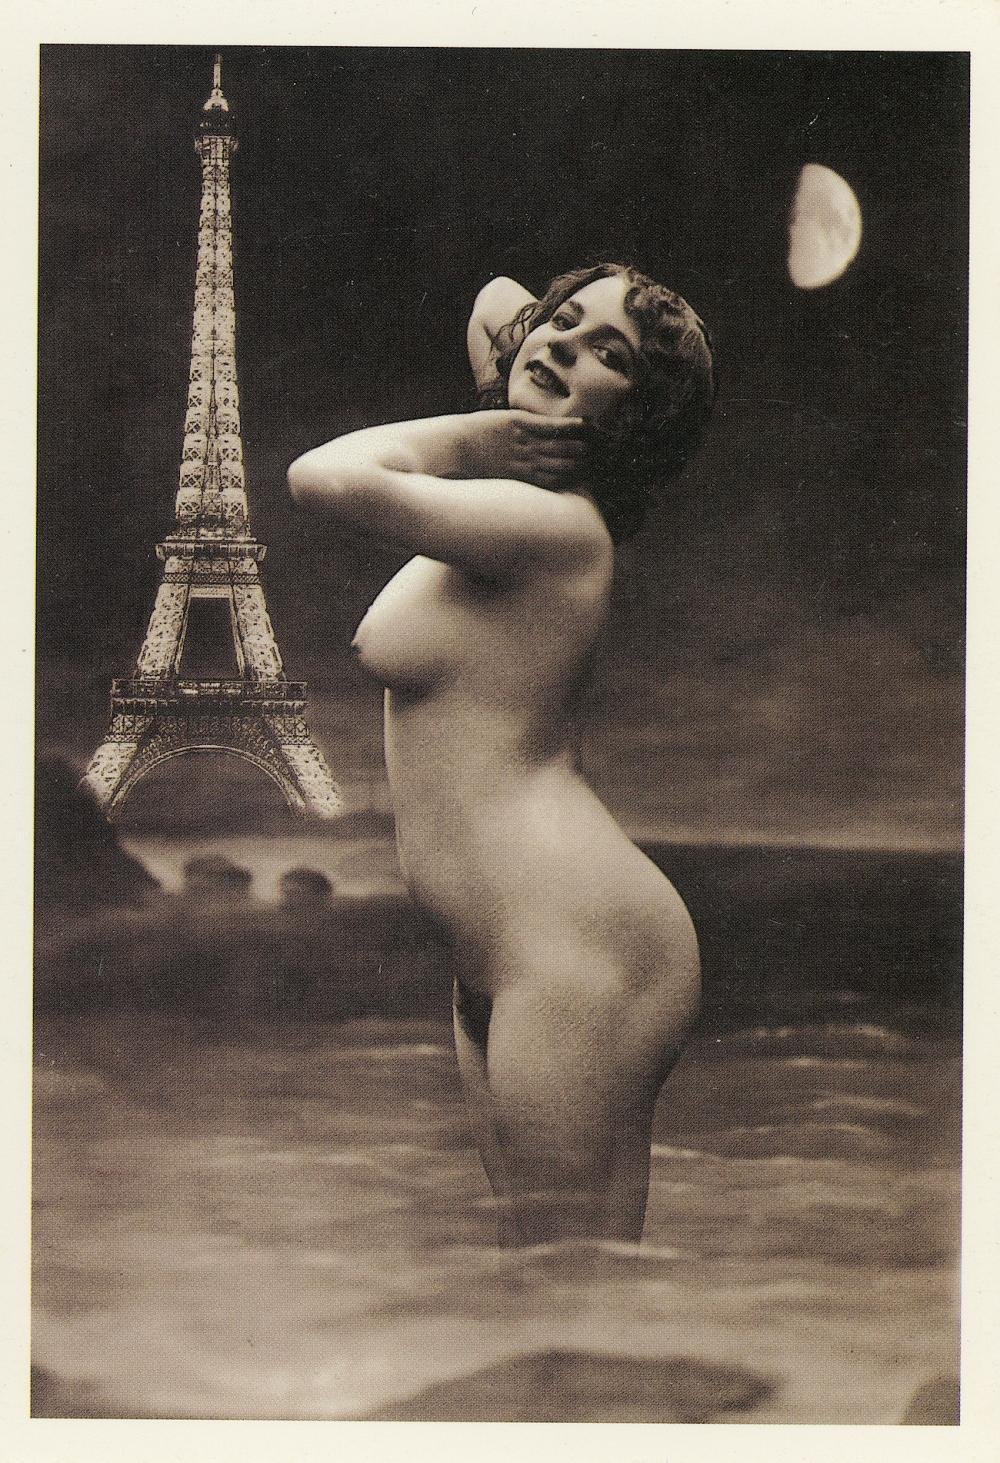 Nude Women in France image